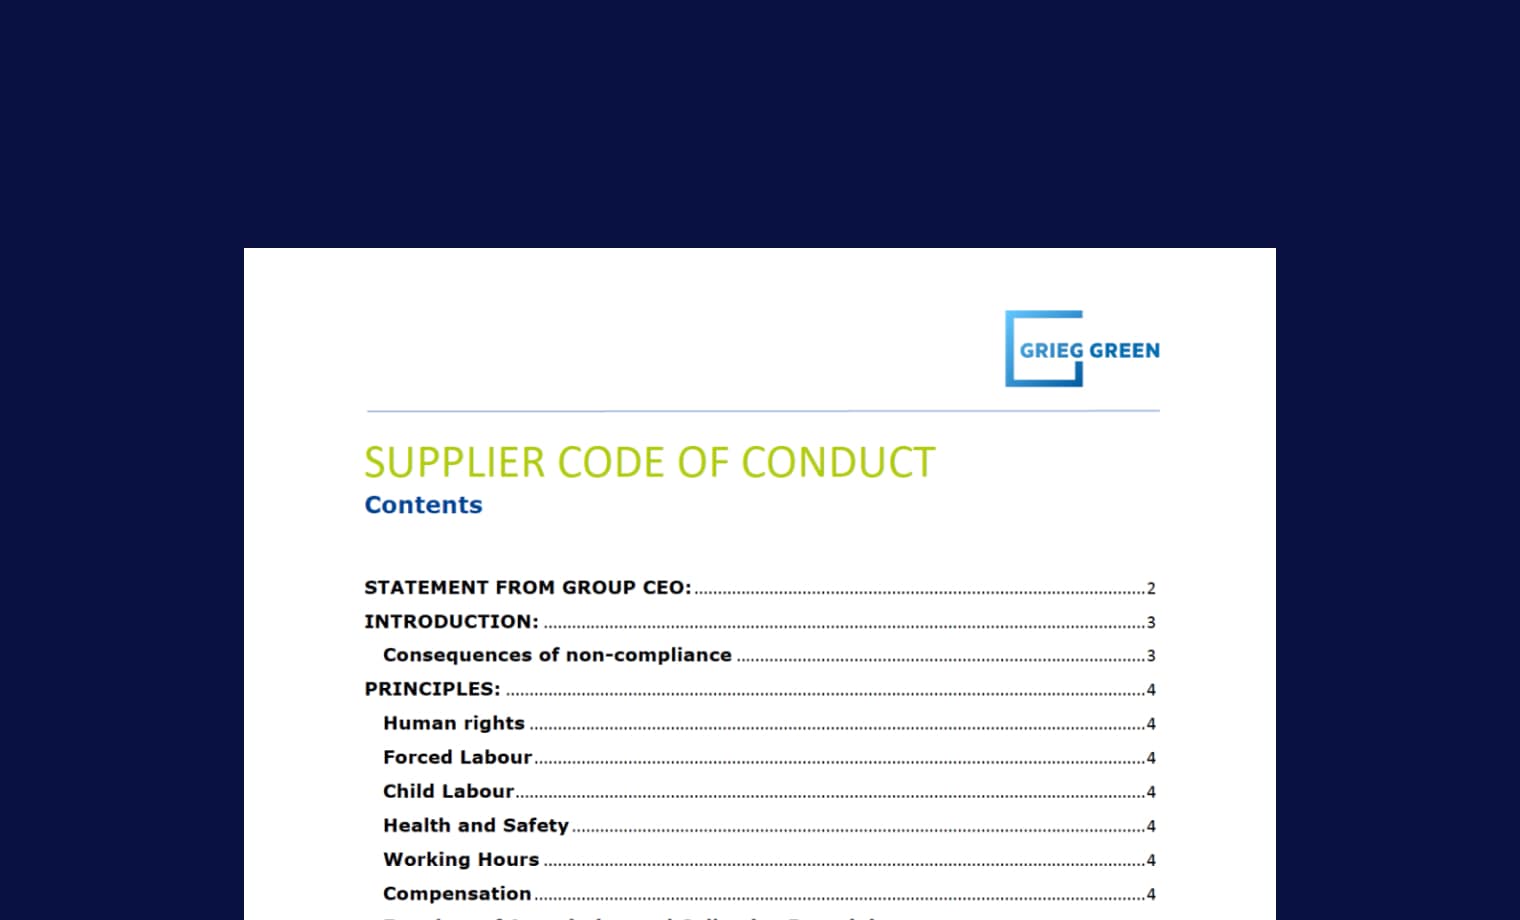 Supplier code of conduct - PDF document.